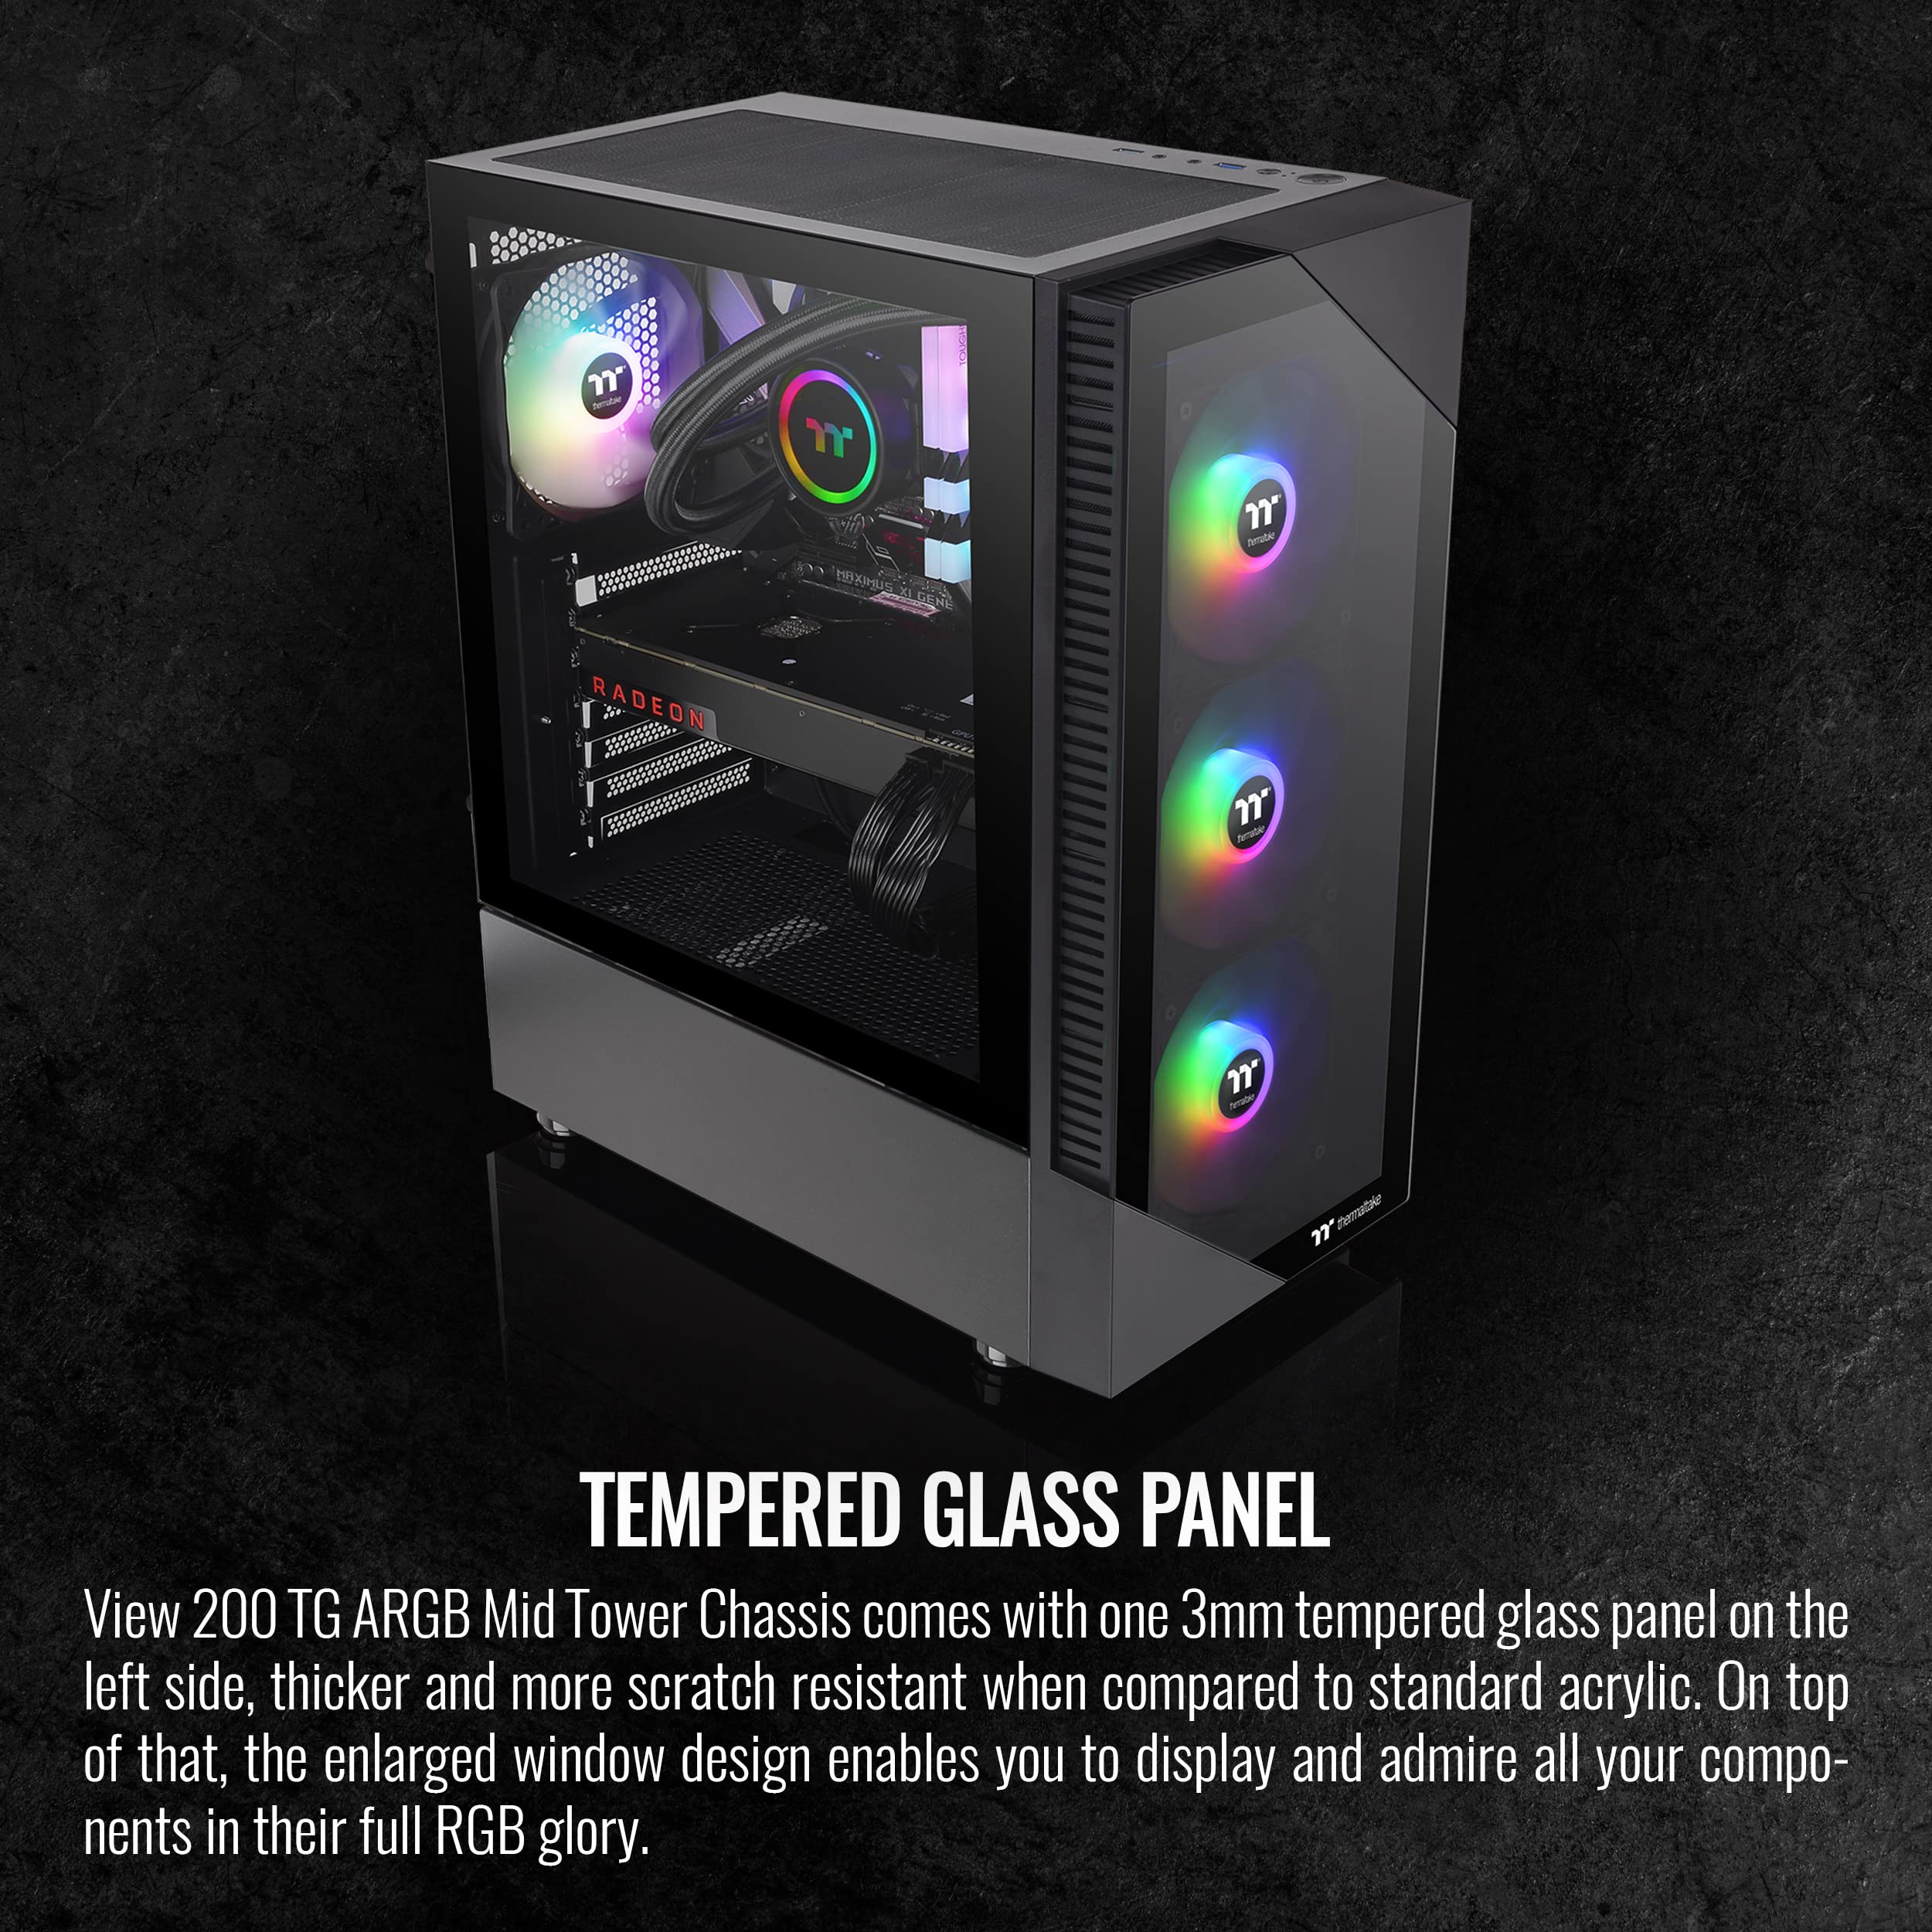 Thermaltake View 200 TG ARGB Motherboard Sync ATX Tempered Glass Mid Tower Computer Case with 3x120mm Front ARGB Fan $59.99 @ Amazon